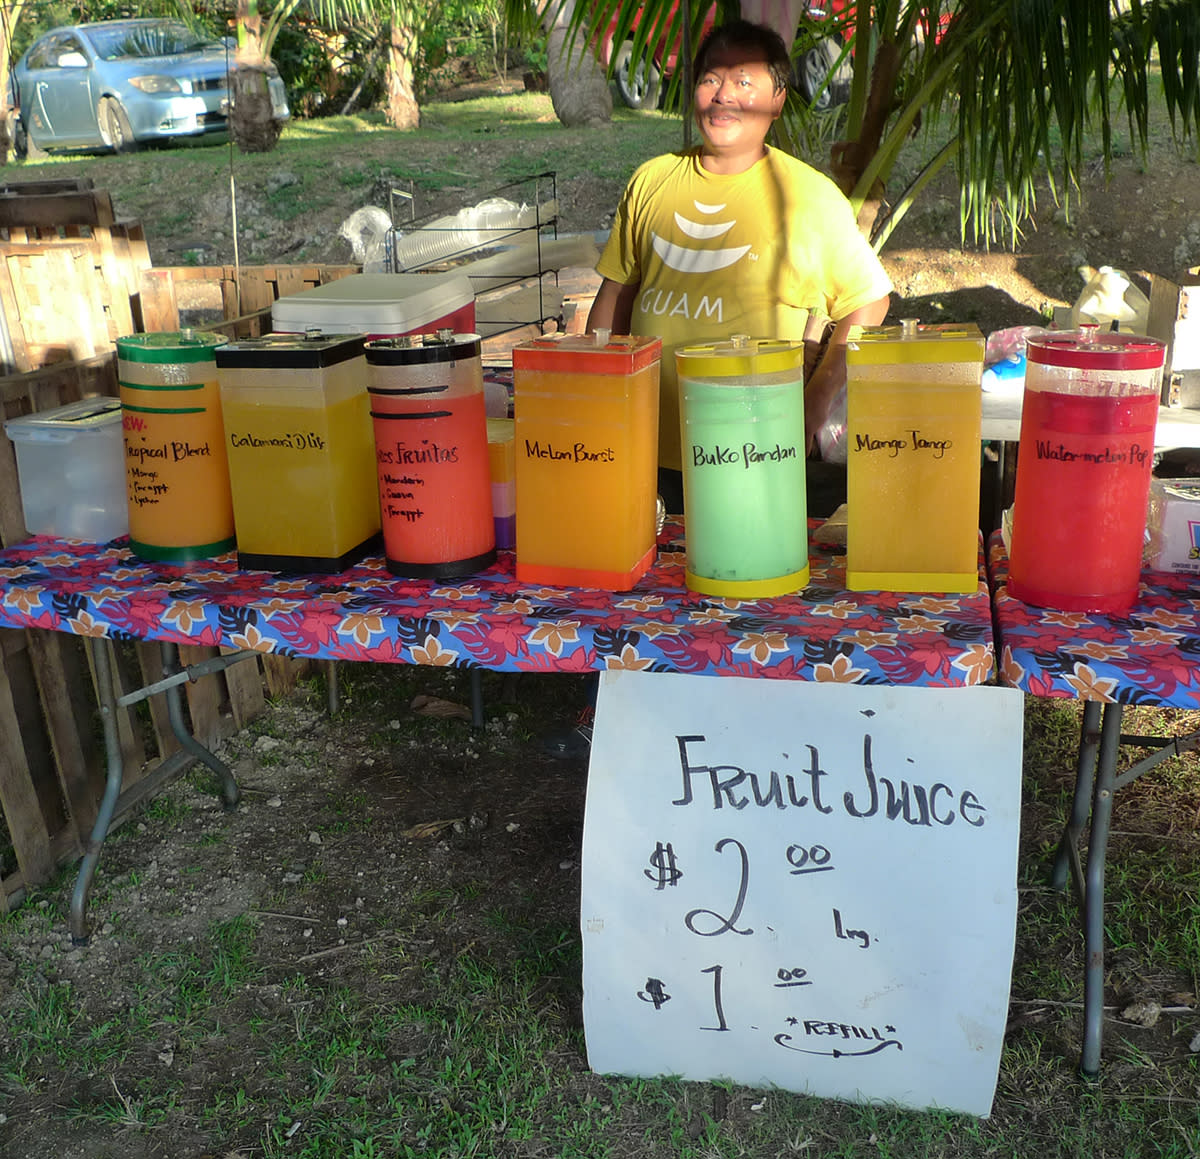 A vendor sells drinks made with local fruit